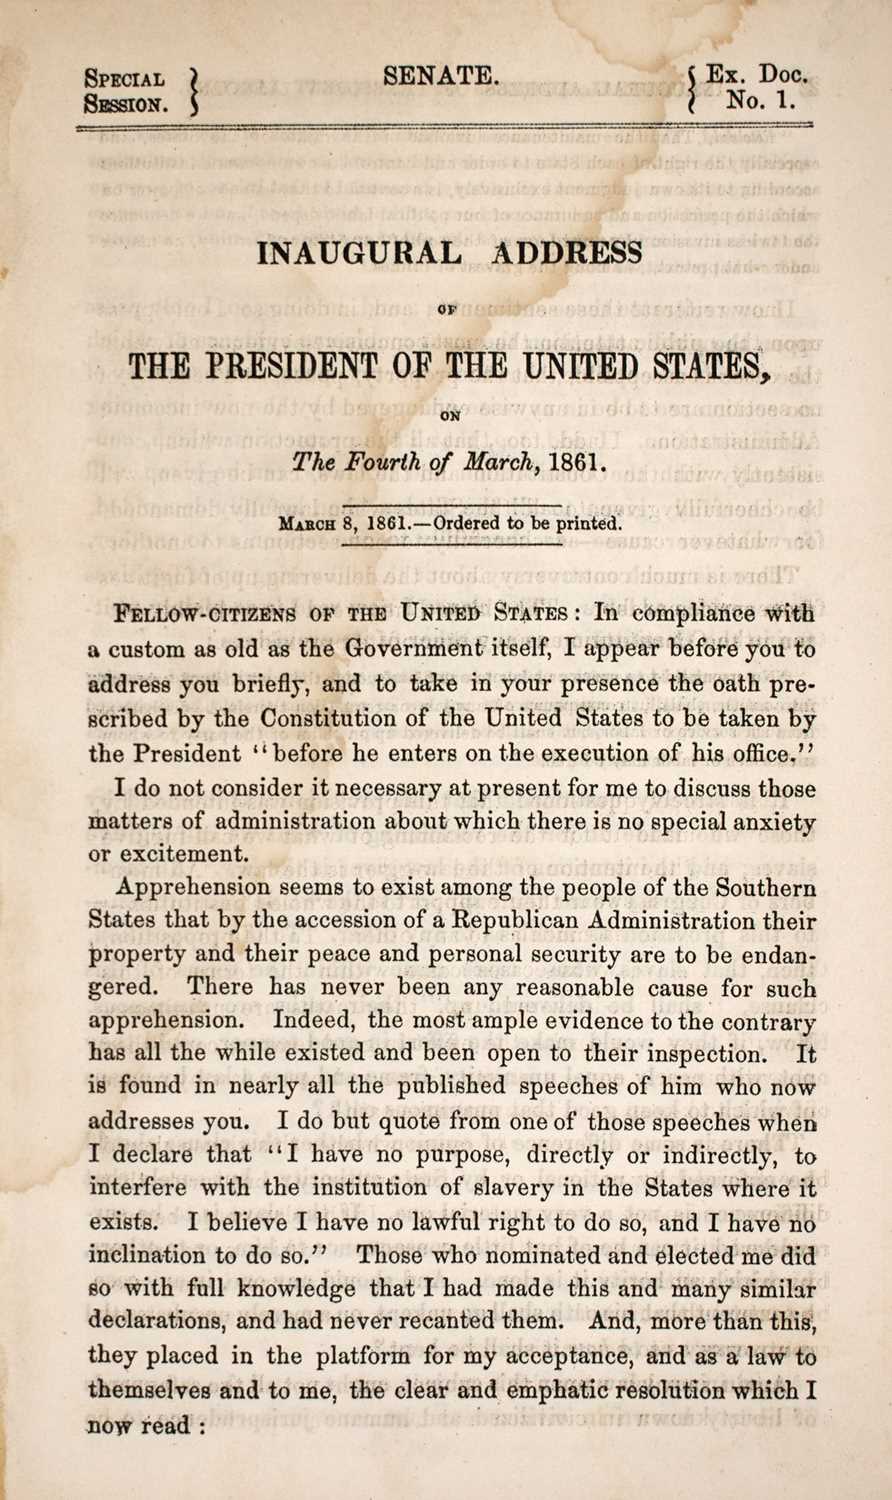 Lot 251 - The Senate printing of Abraham Lincoln's first inaugural address